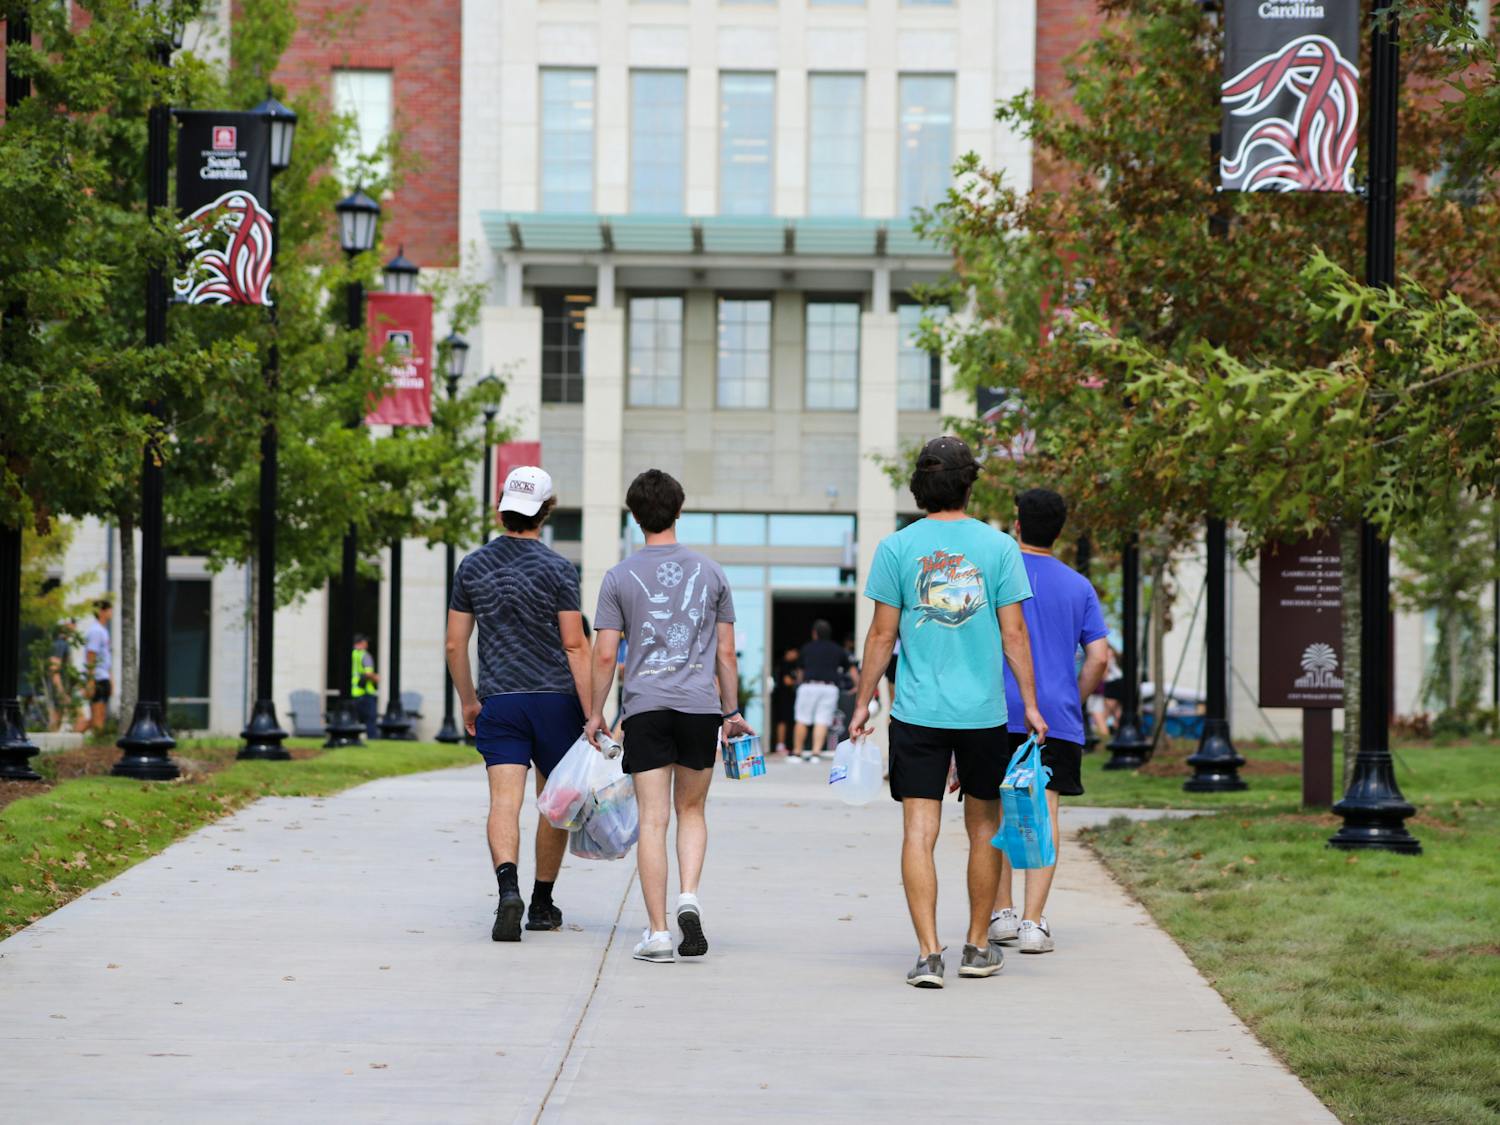 On Aug. 18, 2023, the University of South Carolina officially celebrated the opening of Campus Village. Campus Village is composed of four new dorms on the south side of campus that house over 1,800 students.